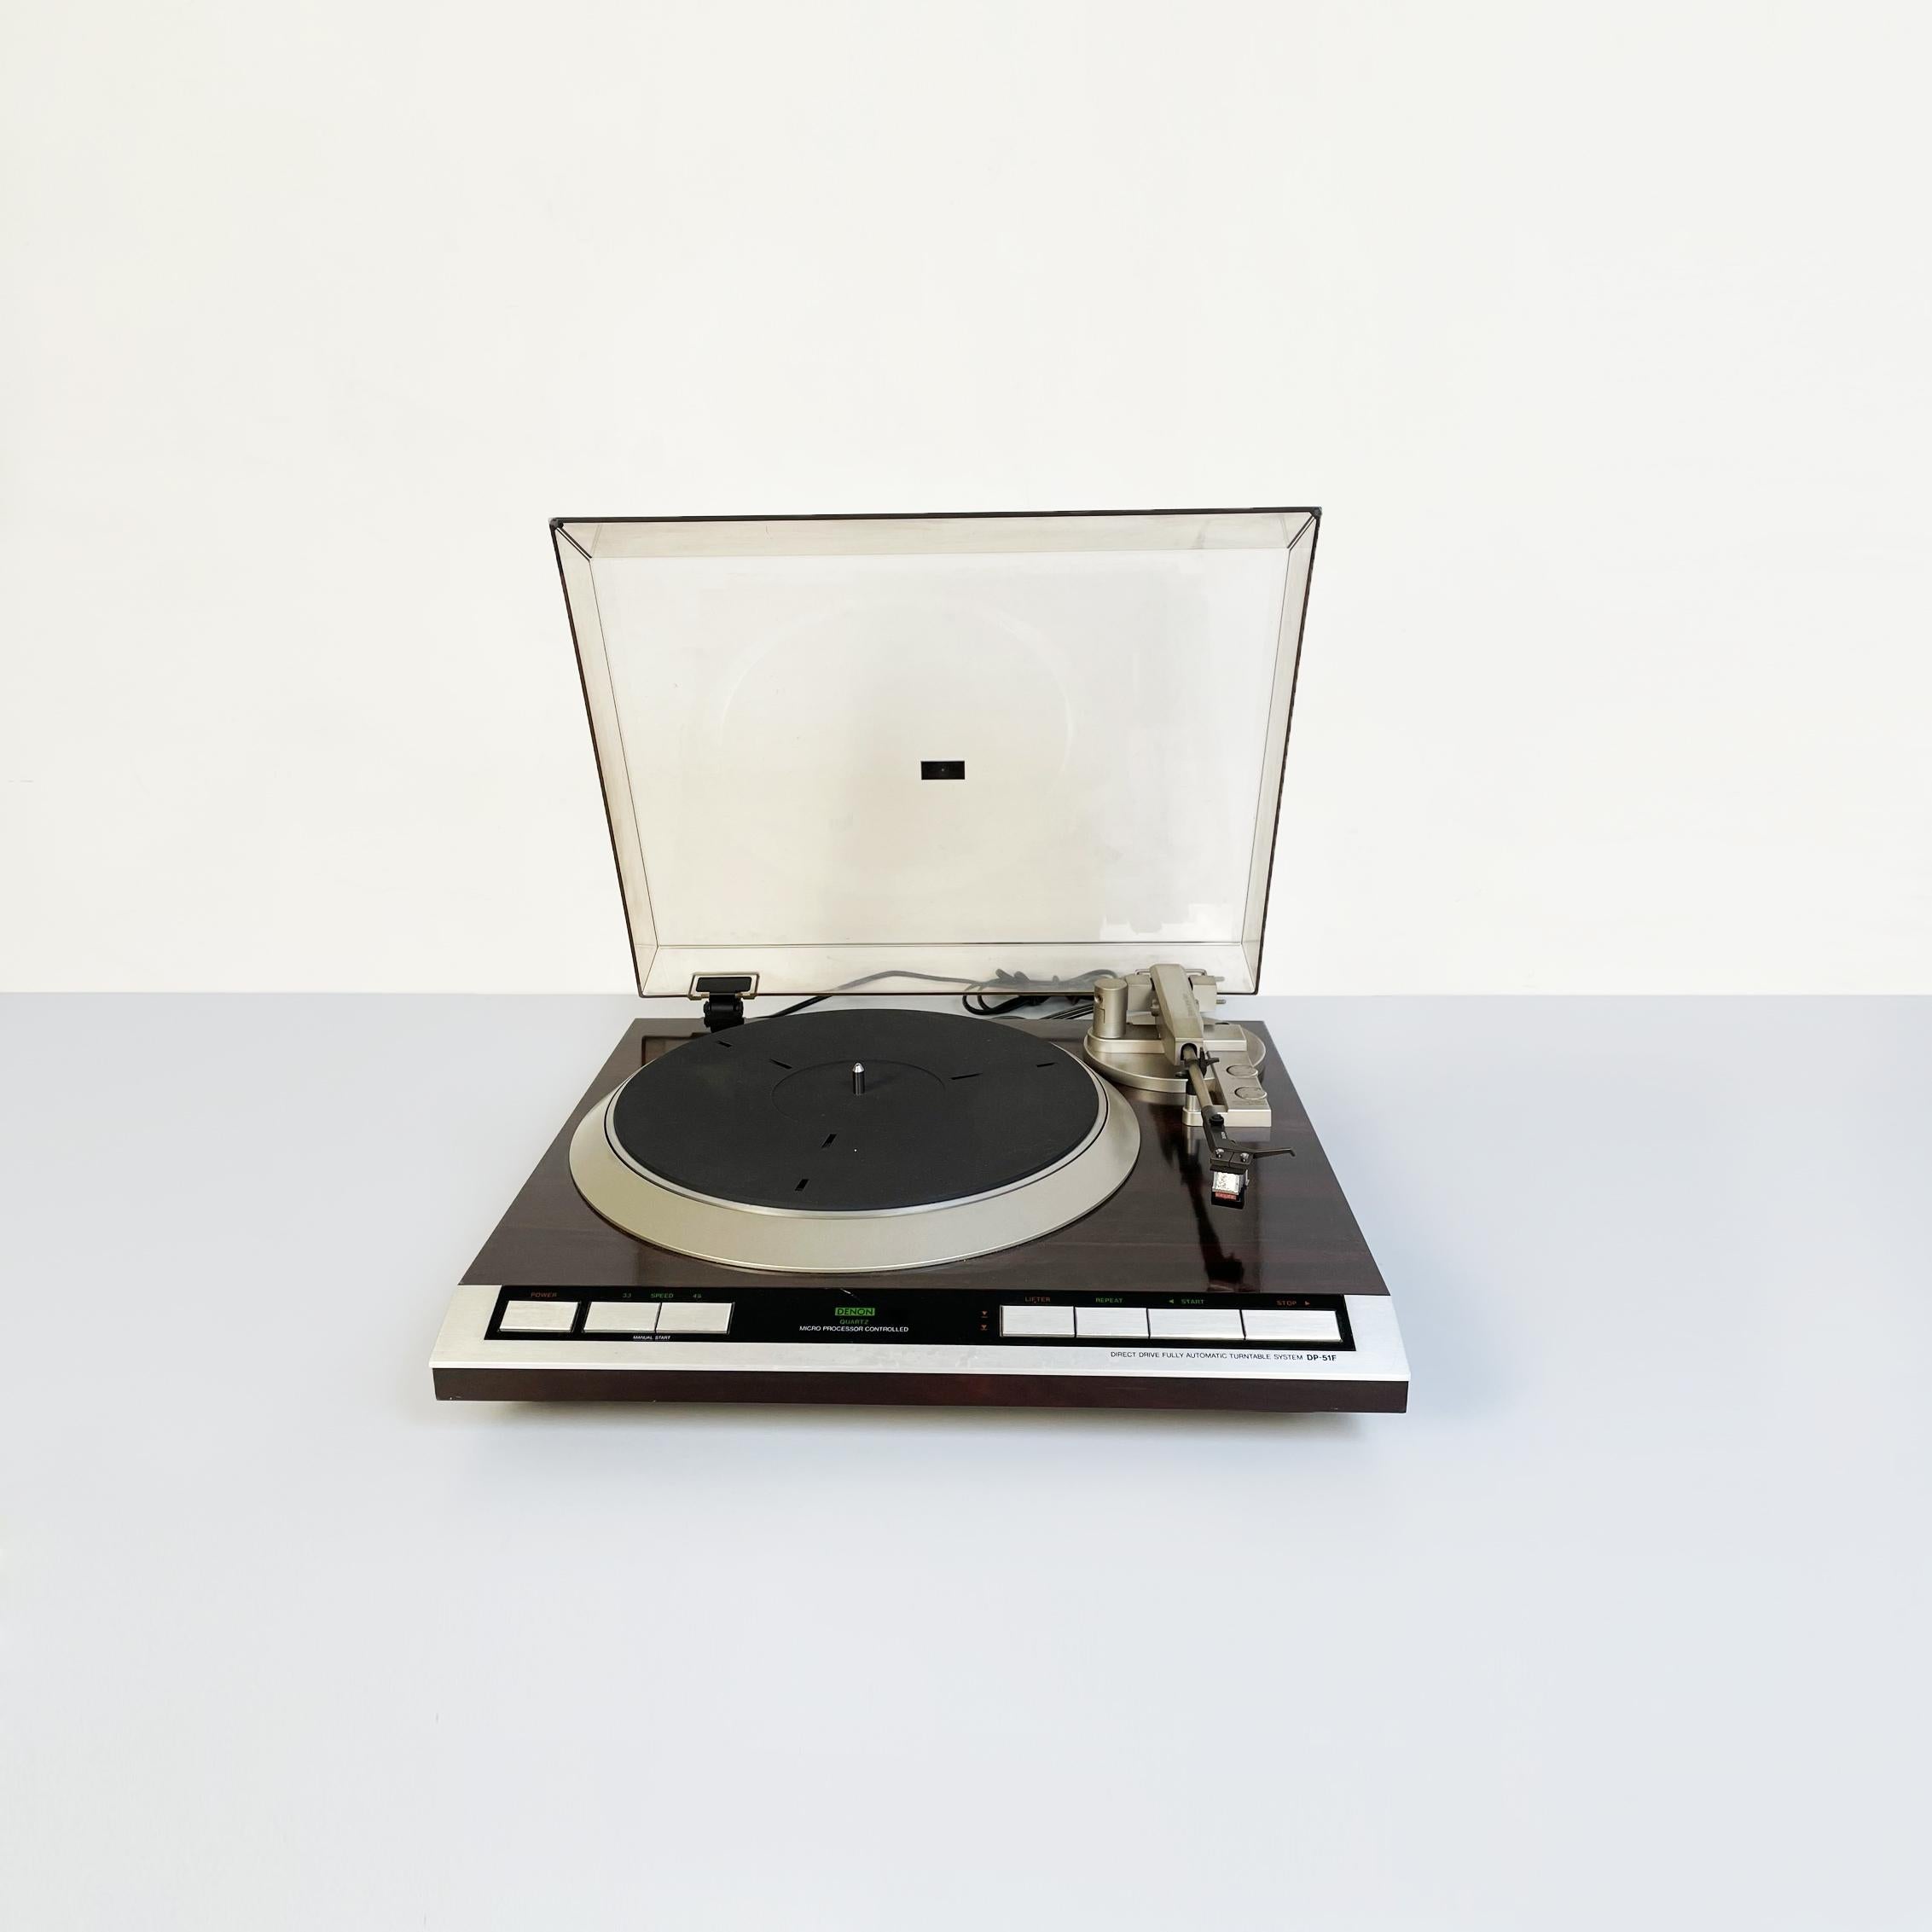 Japanese Mid-Century Modern Direct drive turntable by Denon Marke, 1980s
Japanese direct drive turntable model Quartz lock micro processor controlled turntable DP-45F in wood and aluminum with plastic cover for 45 and 33 rpm vinyls, fully